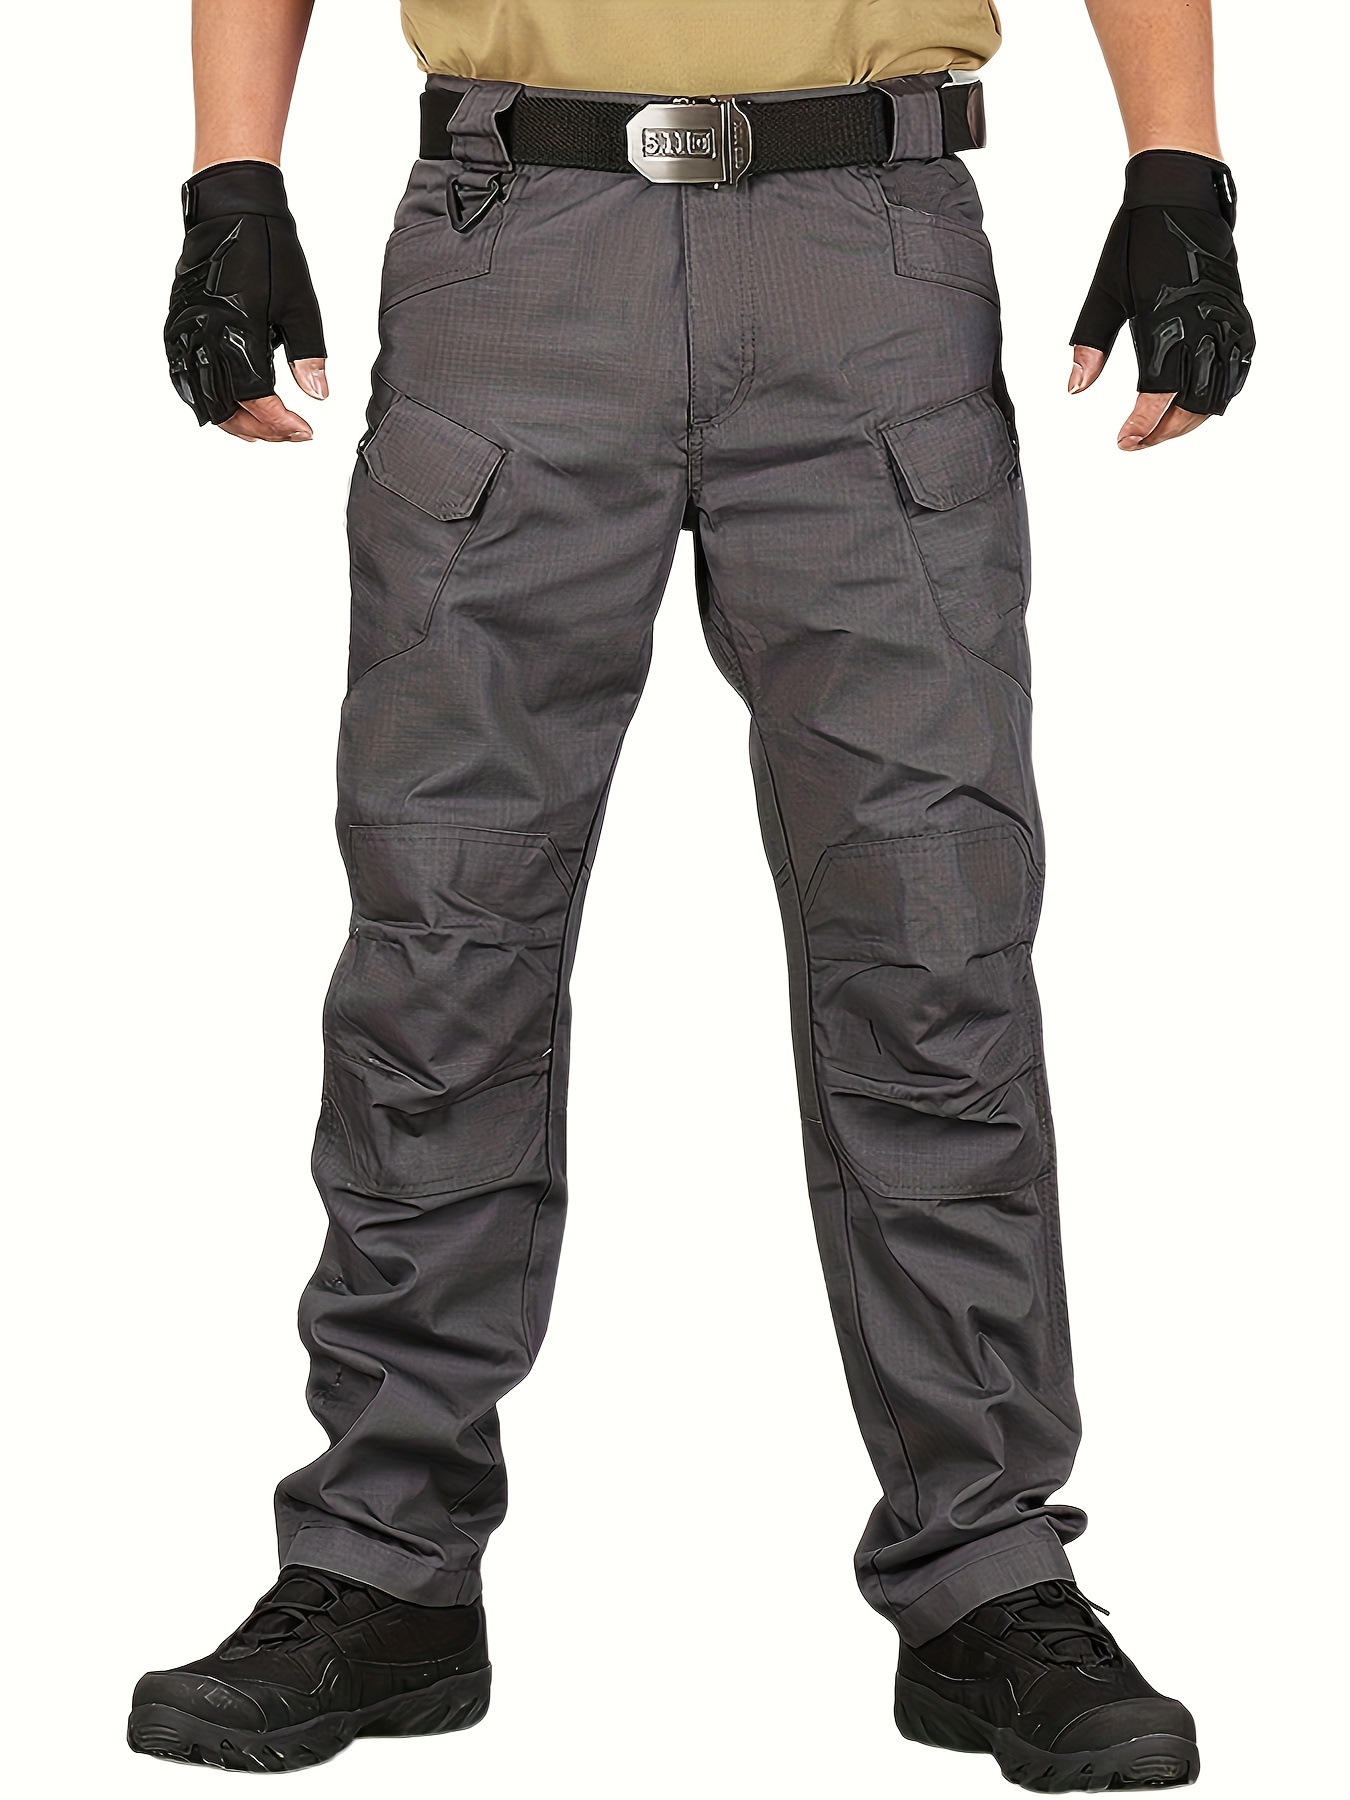 Summer Trousers Mens Tactical Fishing Pants Outdoor Hiking Nylon